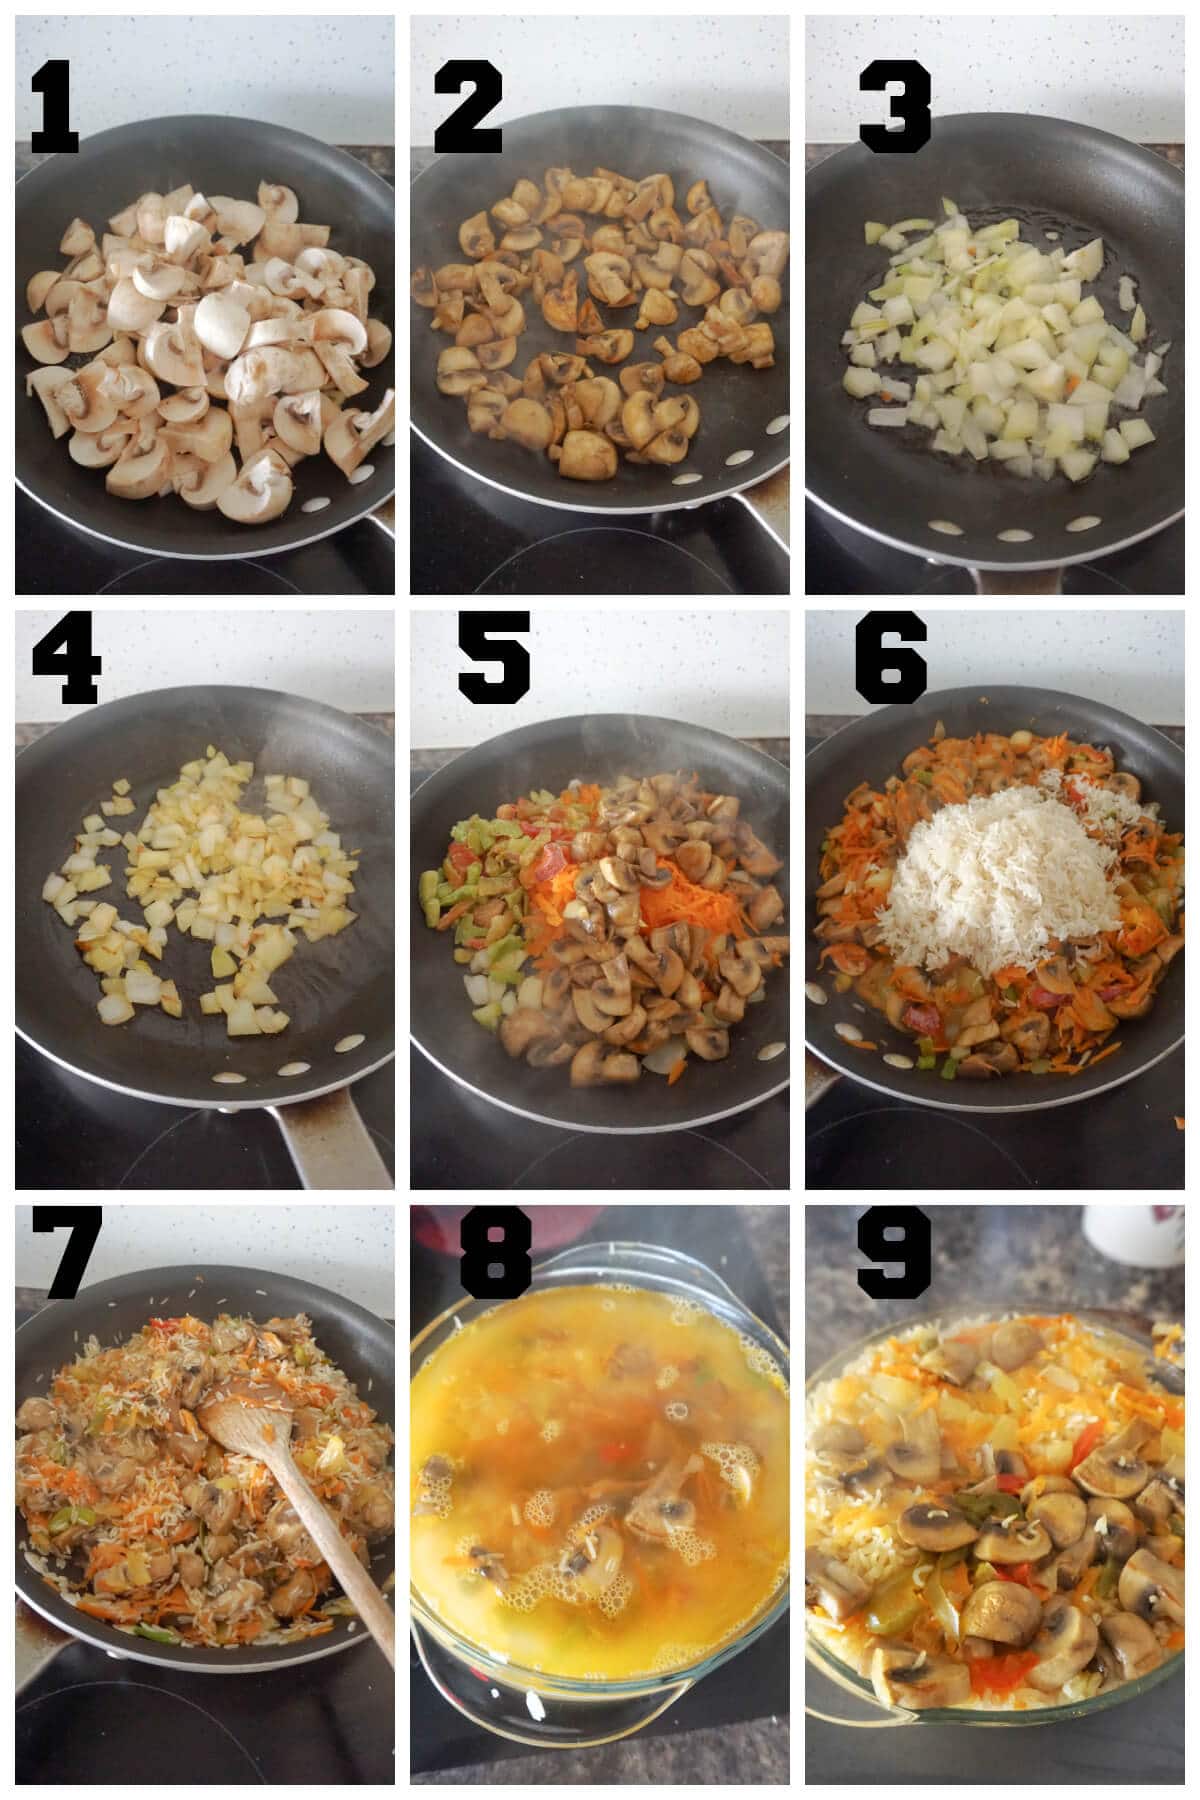 Collage of 9 photos to show how to bake rice with vegetables.